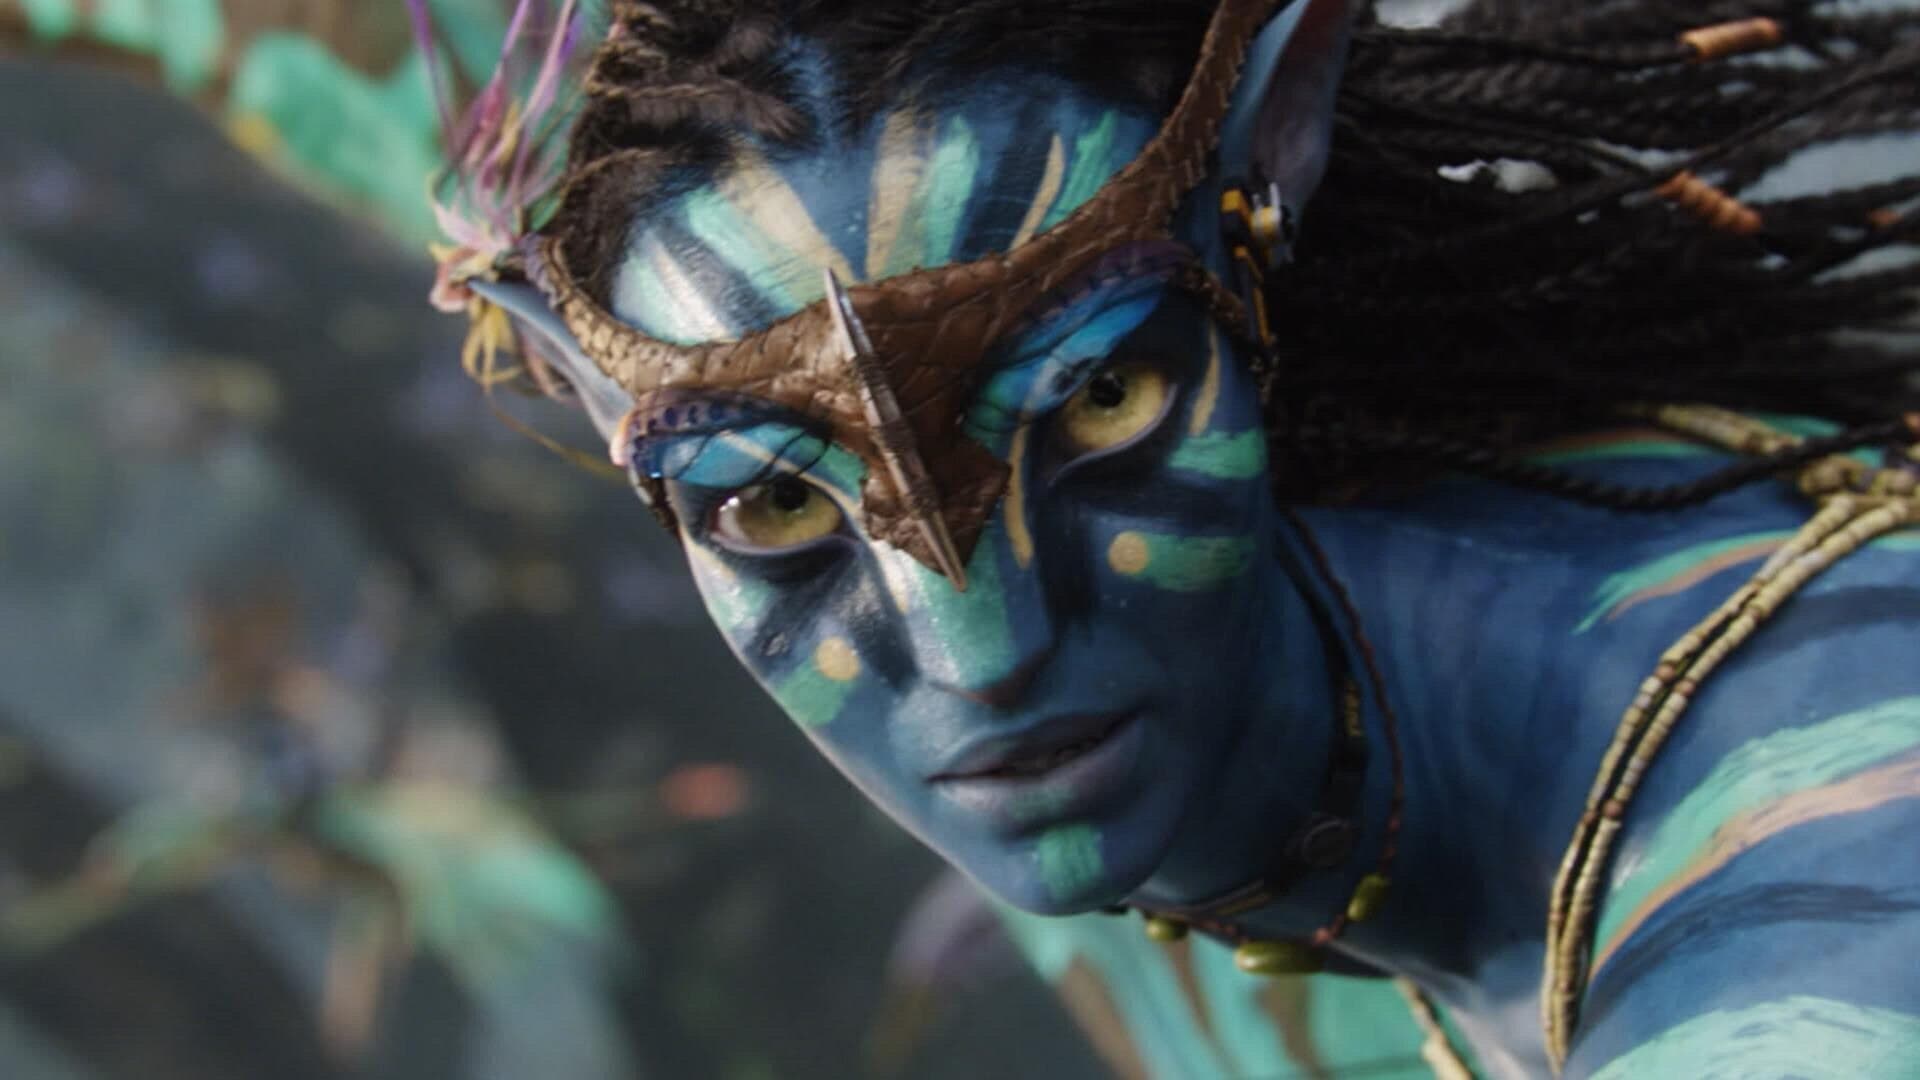 Watch Avatar 2 Full movie Online In HD  Find where to watch it online on  Justdial